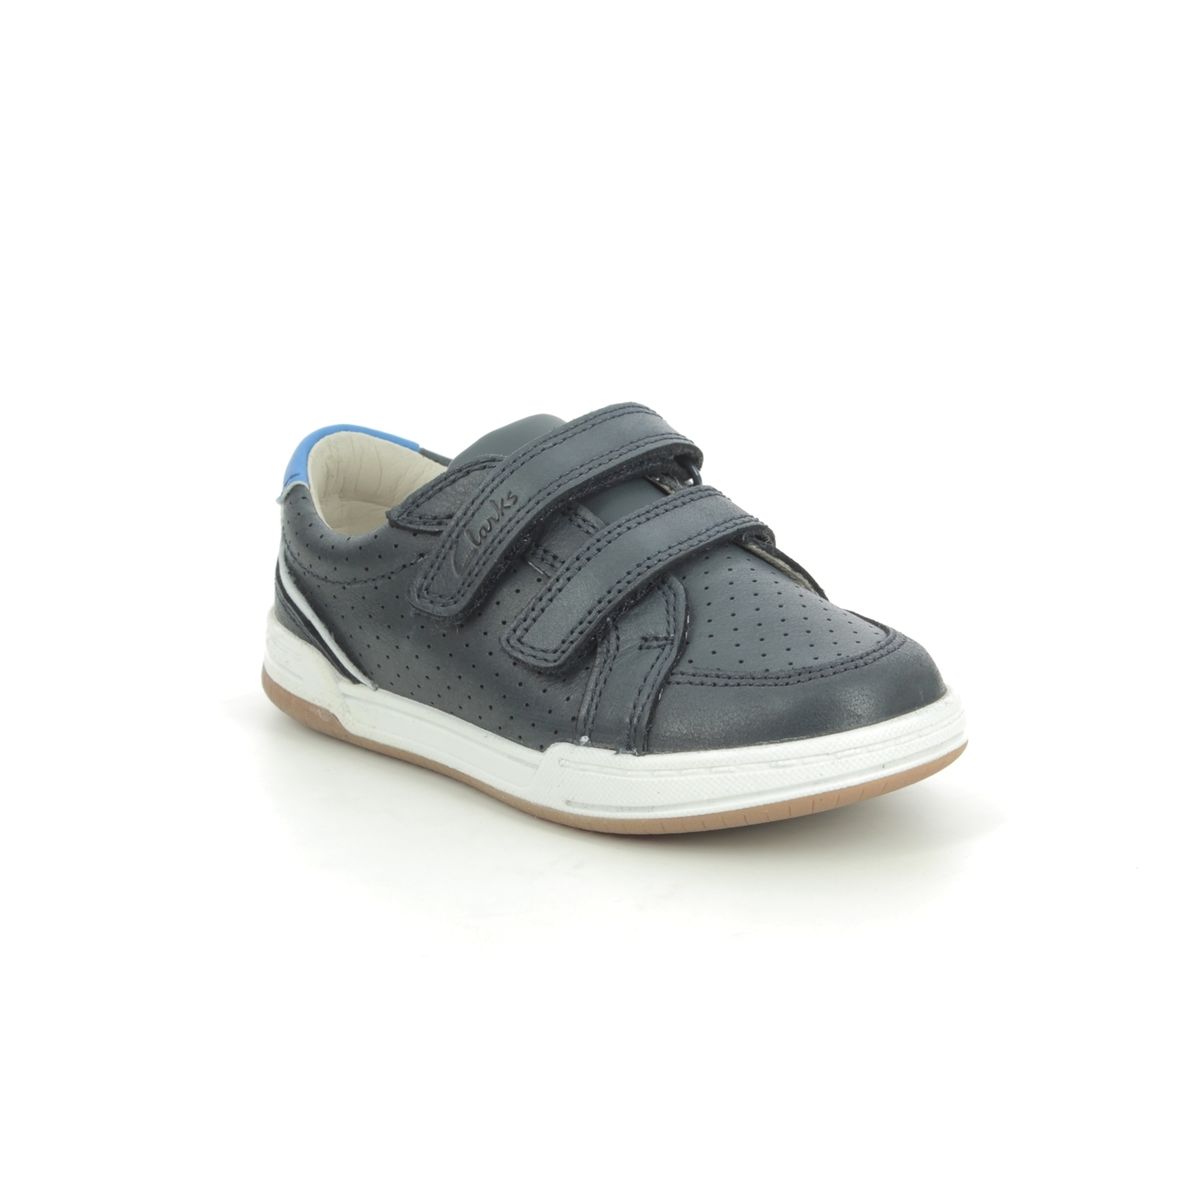 Clarks Fawn Solo T Navy Leather Kids Boys Toddler Shoes 589887G In Size 4.5 In Plain Navy Leather G Width Fitting For kids